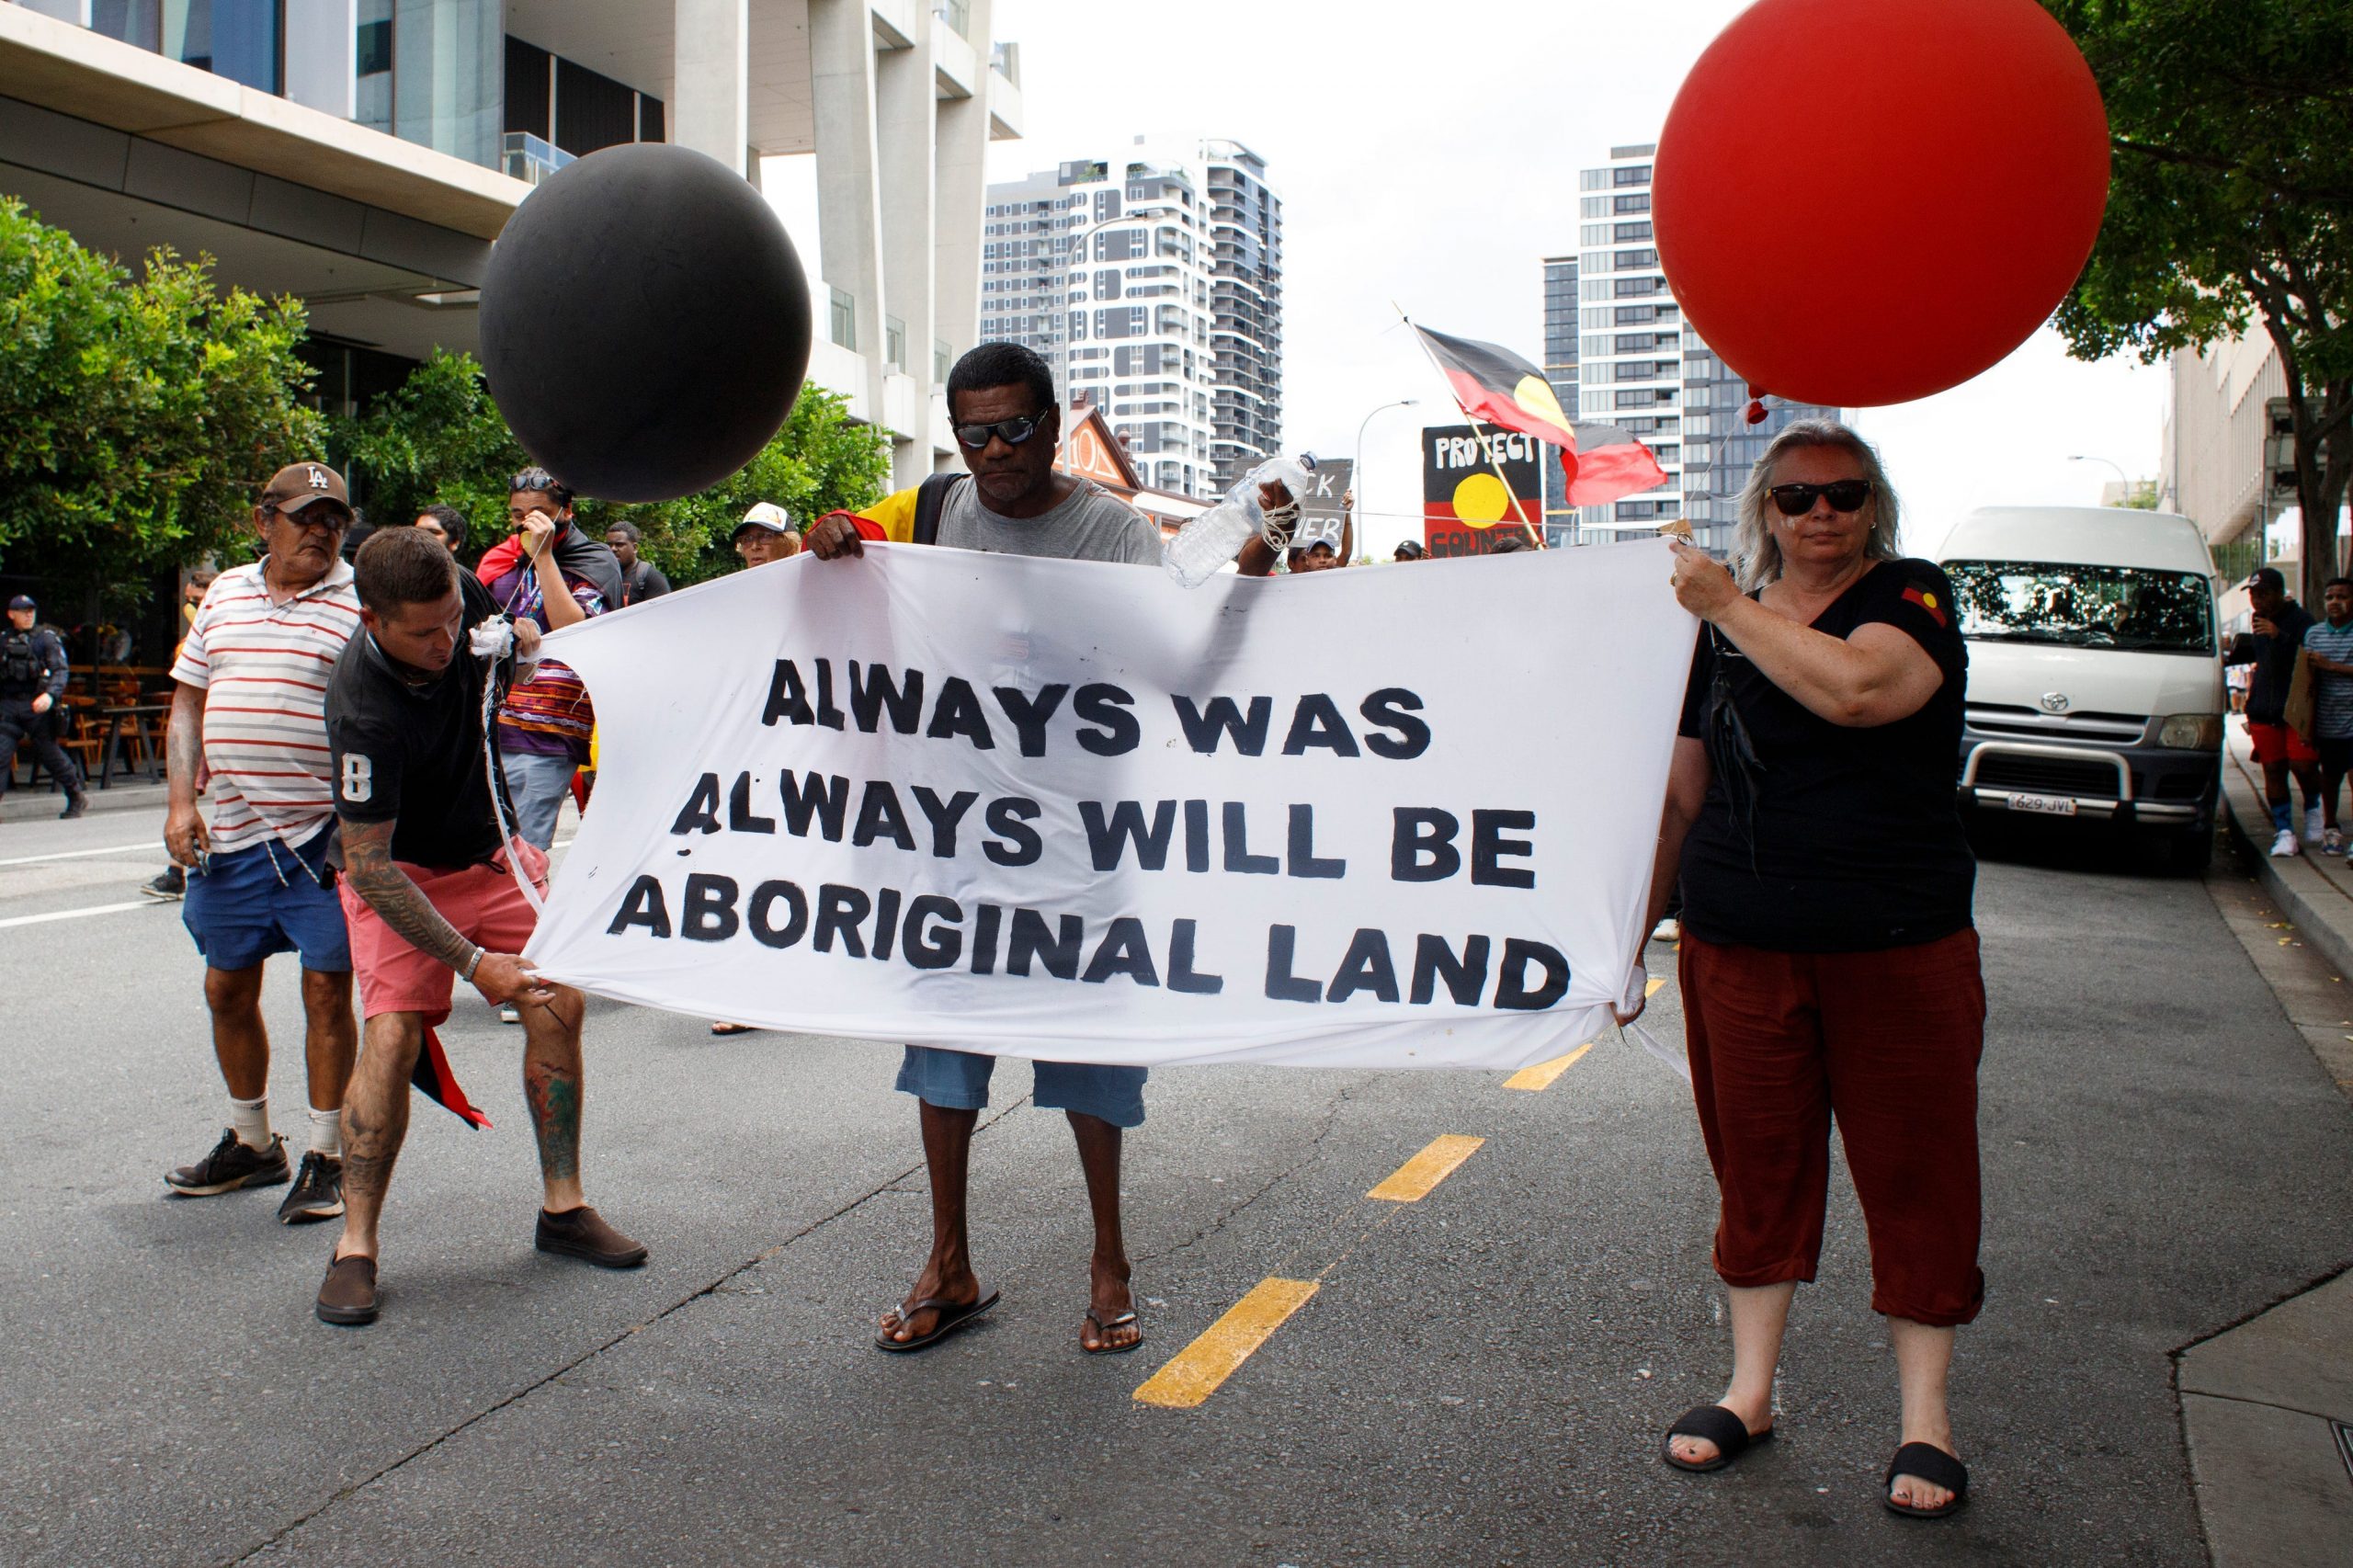 Protestors in Australia fight for Indigenous Aboriginal peoples' rights